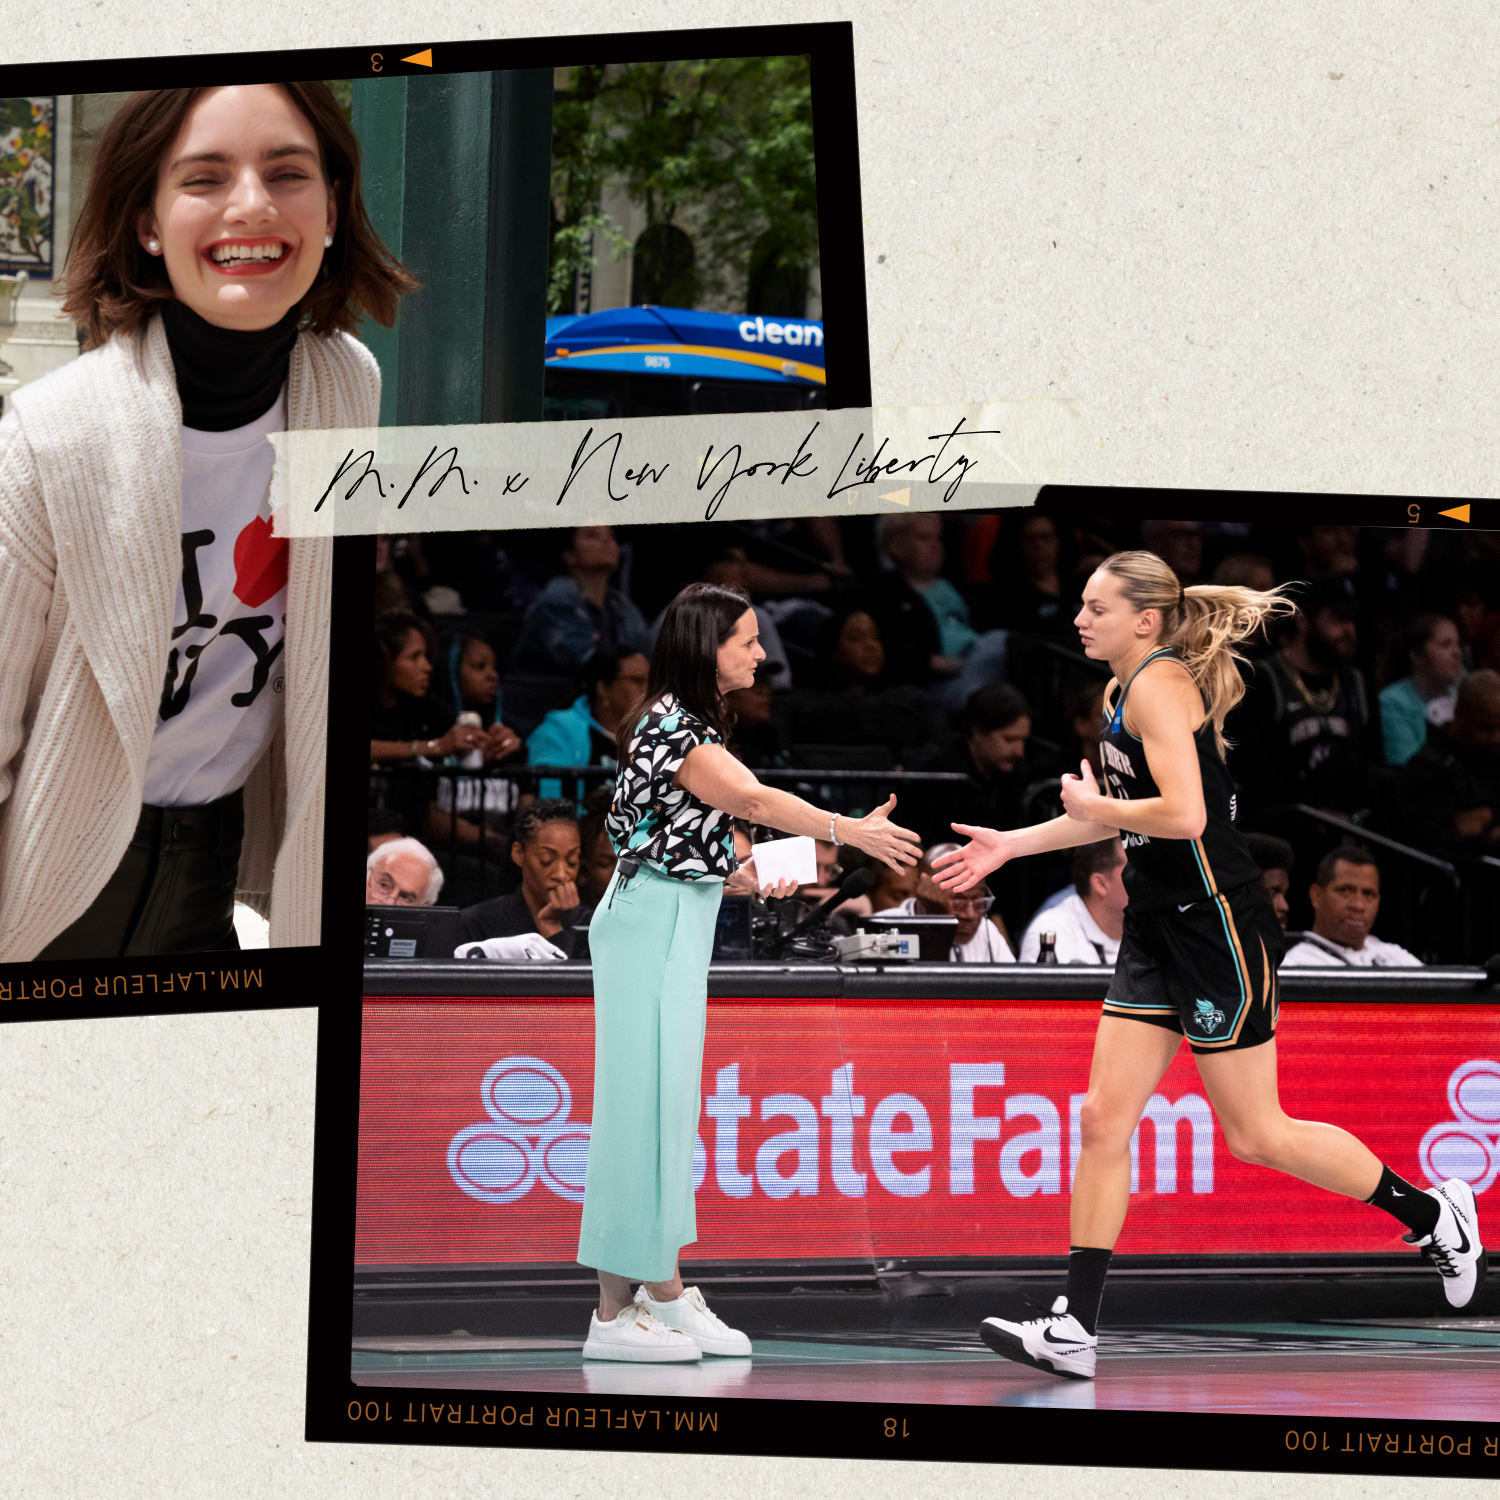 2 images, 1 of a woman wearing an I heart NY shirt and another of the new york liberty